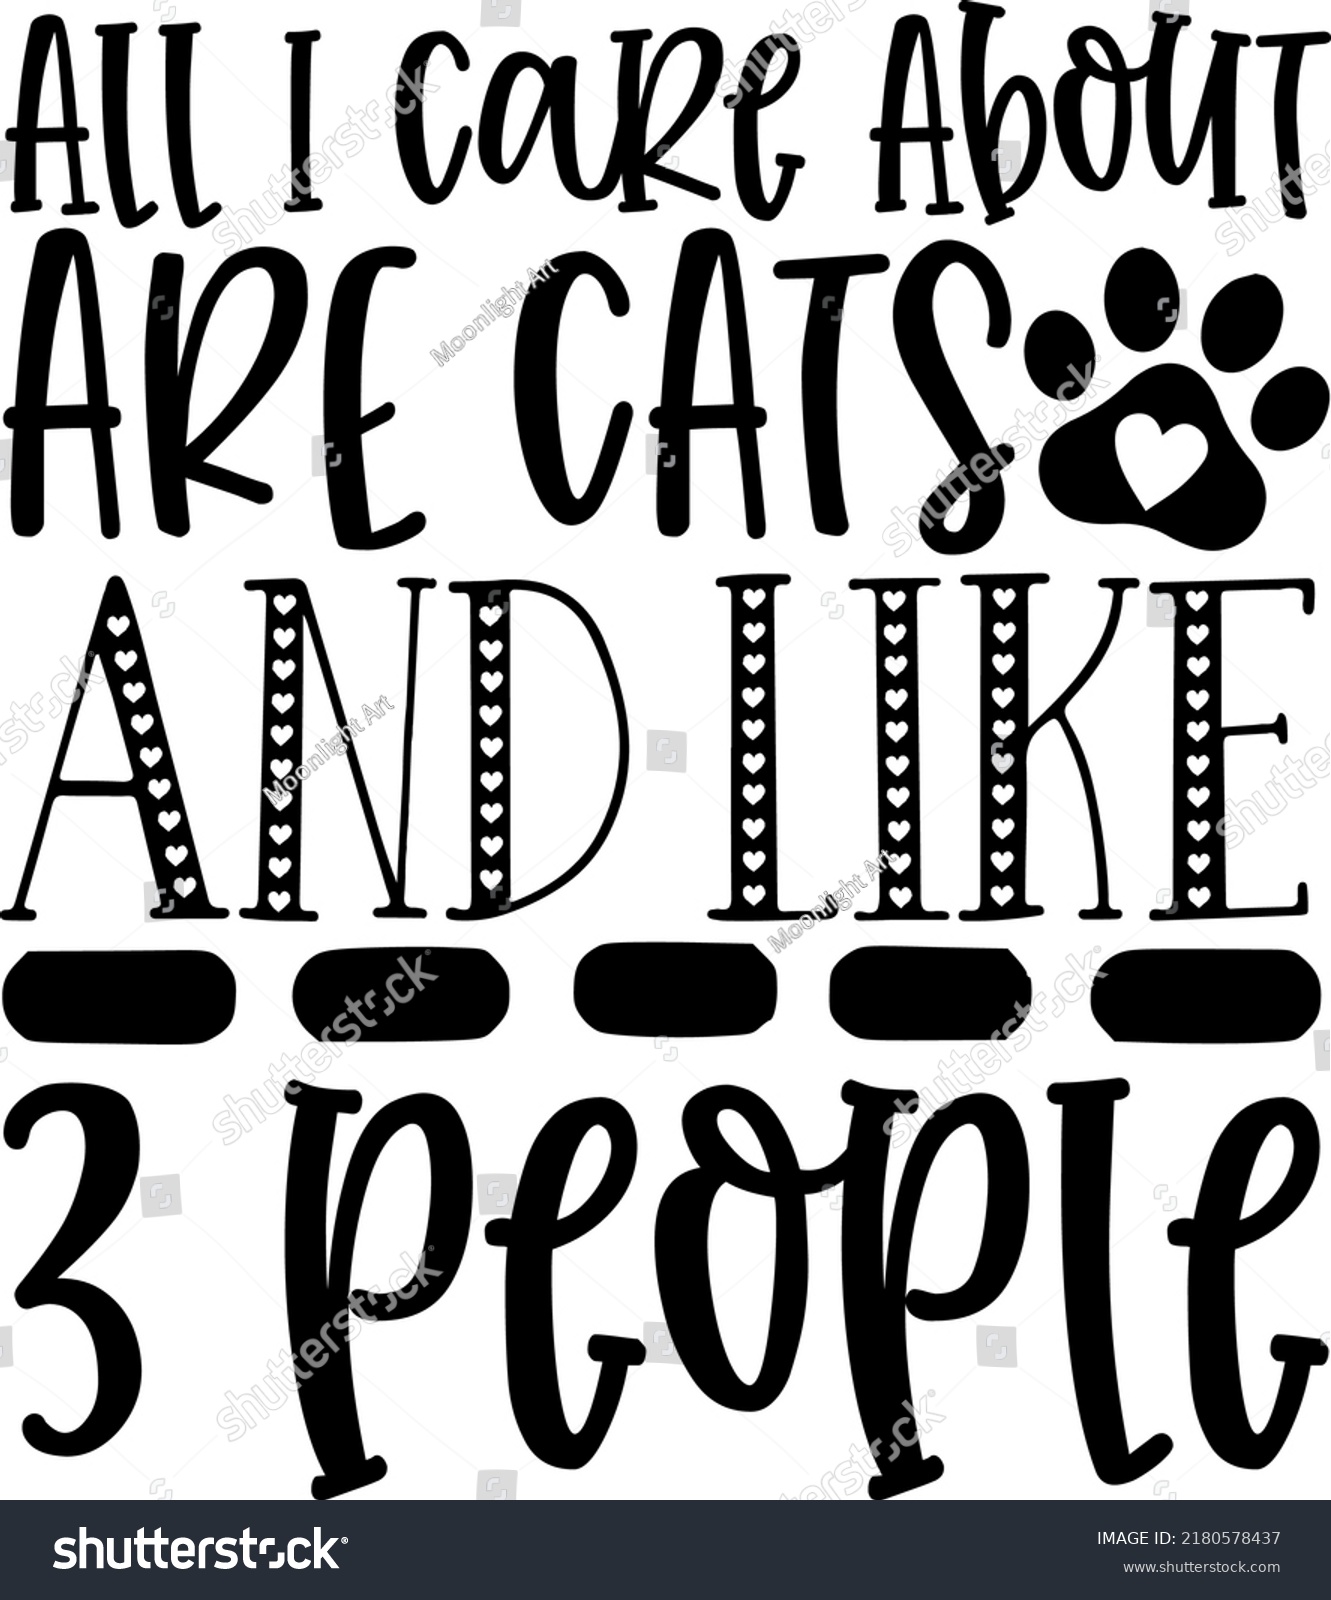 SVG of All I Care About Are Cats svg, care cat, cat paws, bone,Paw Rescue, Like 3 People Funny Pet Cats Svg Cat lover svg